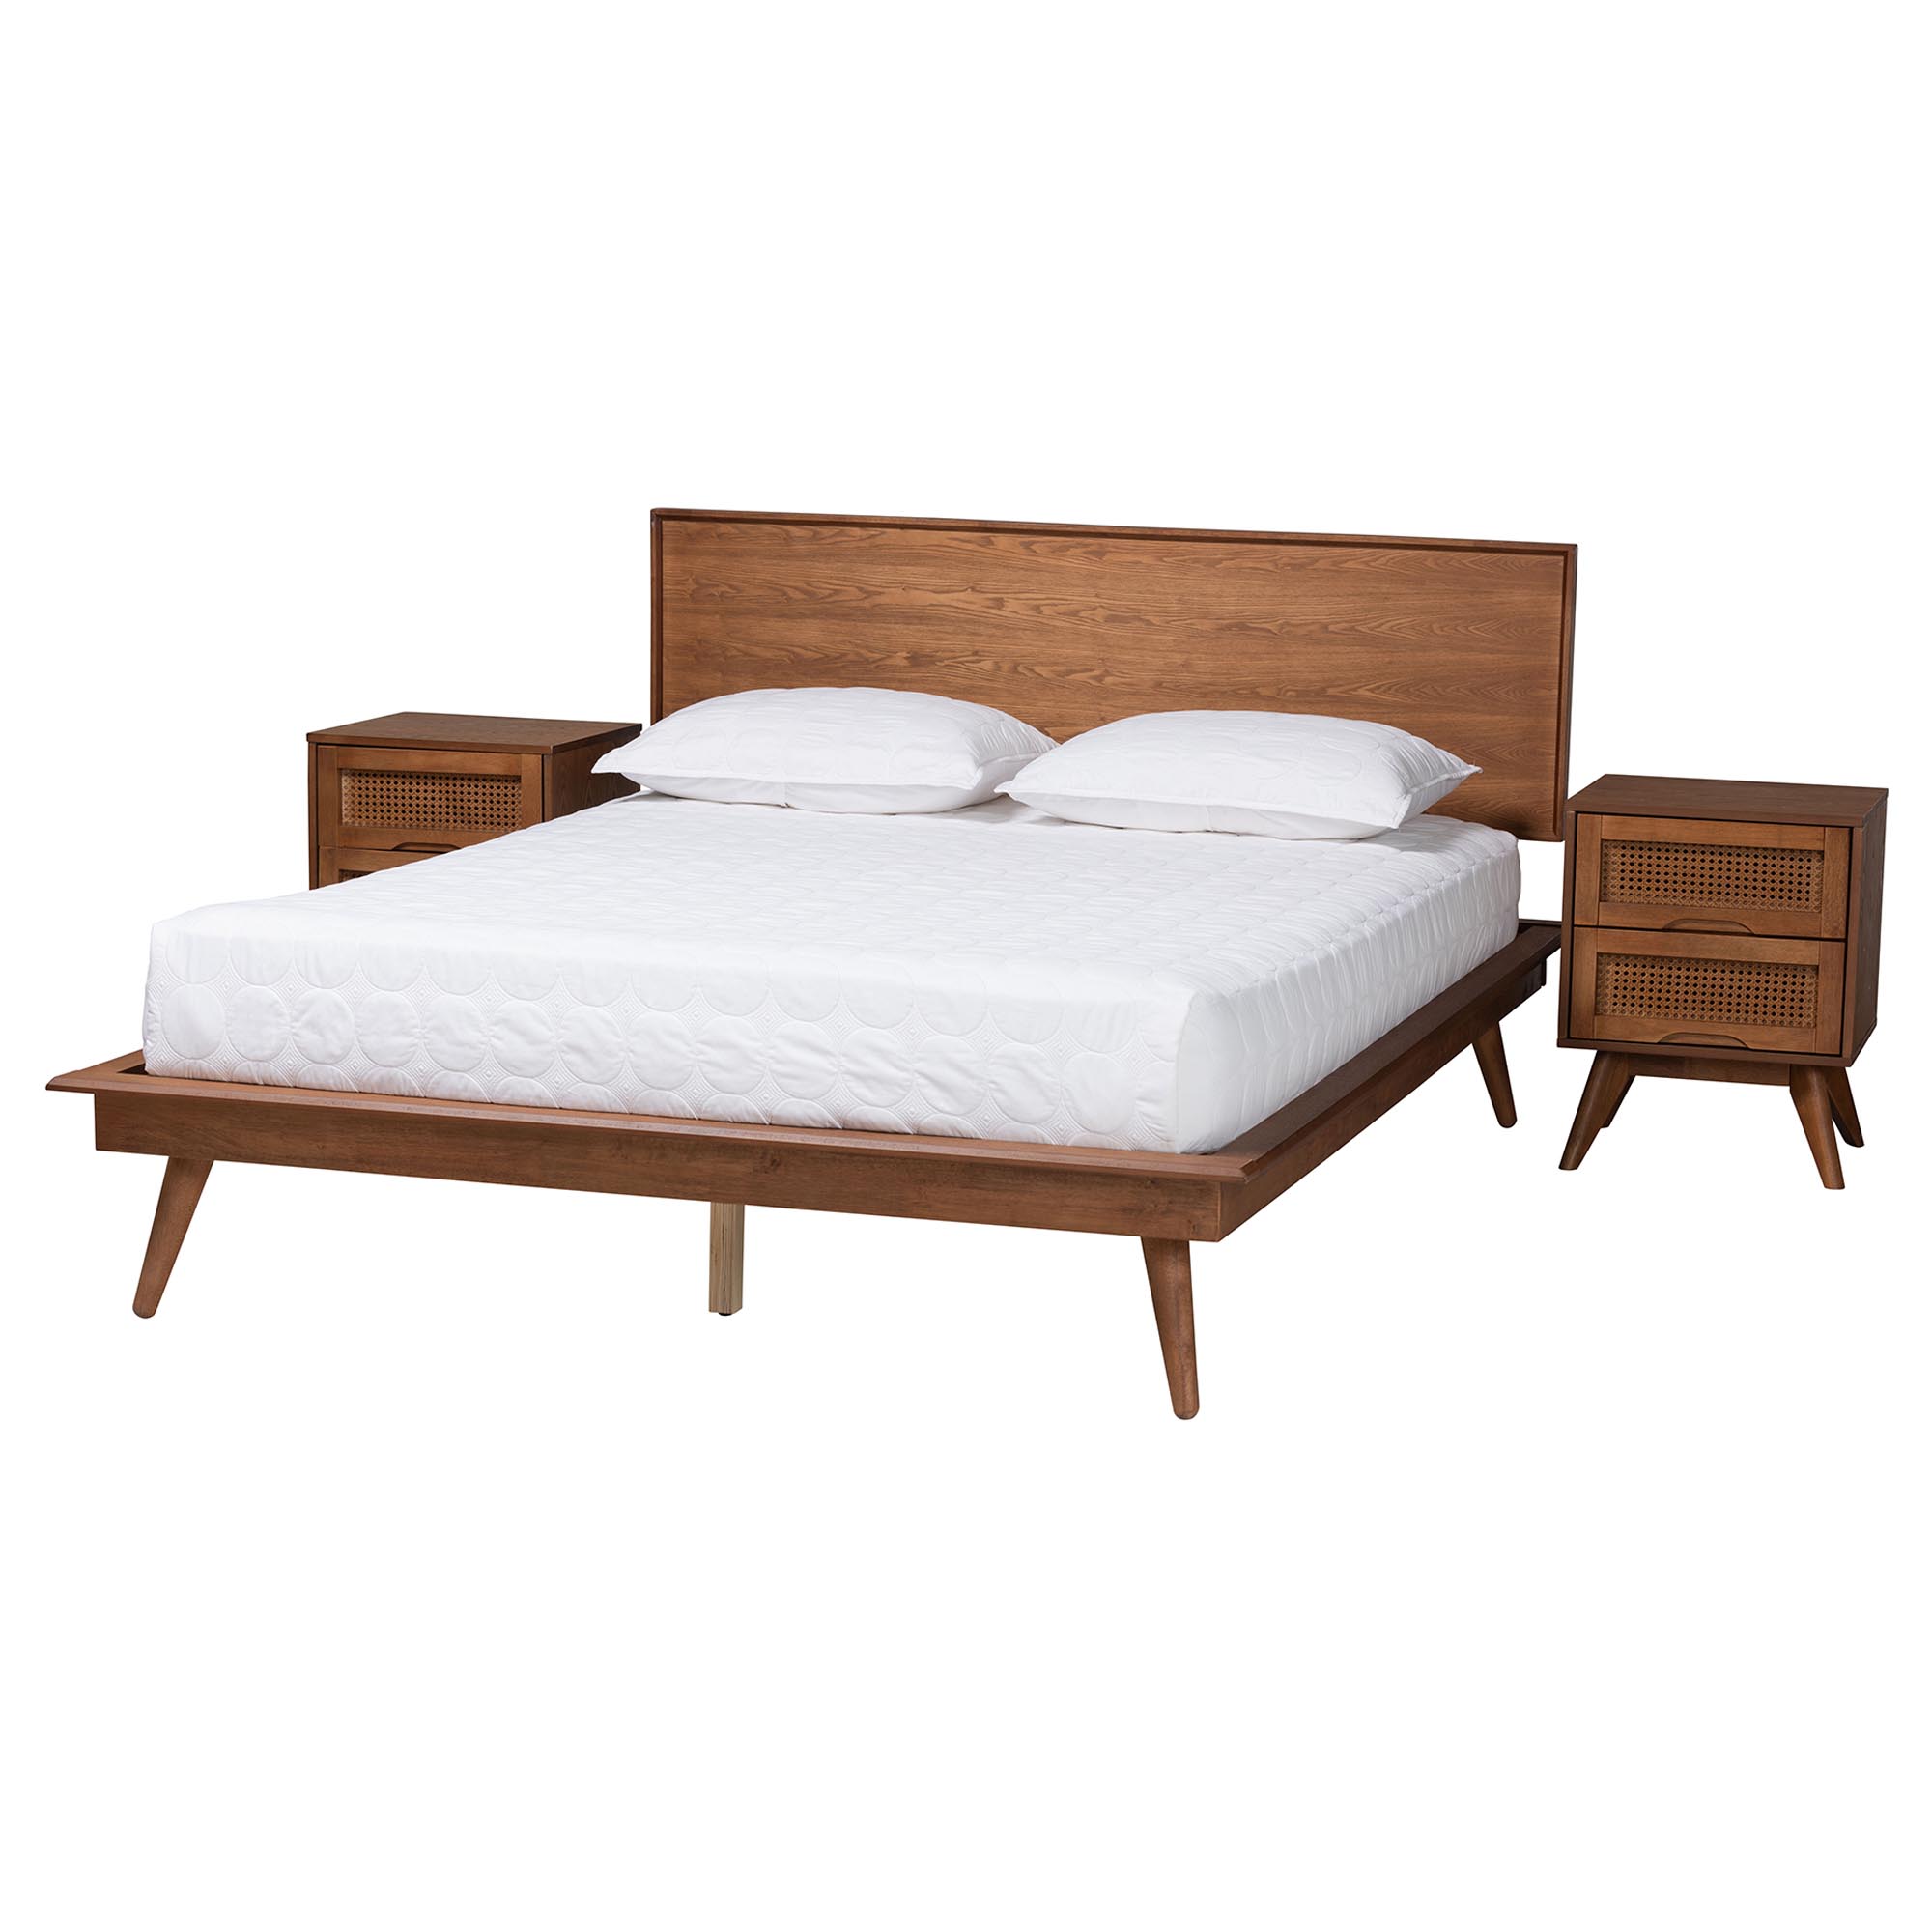 Baxton Studio Melora Mid-Century Modern Walnut Brown Finished Wood and Rattan Queen Size 3-Piece Bedroom Set